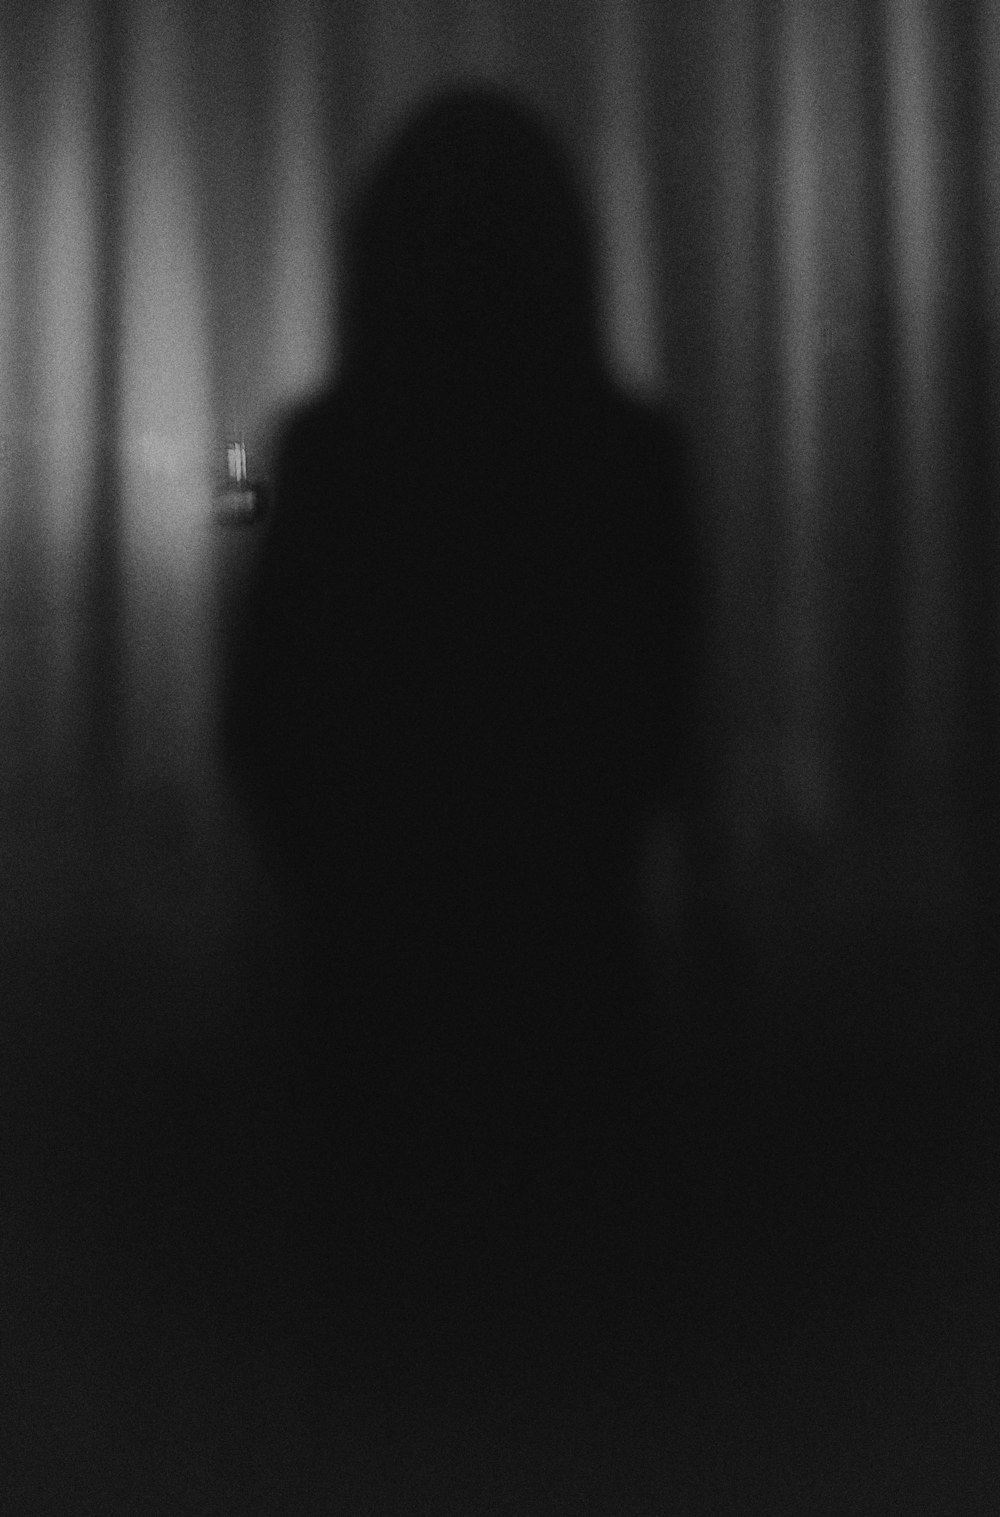 a person standing in front of a curtain in the dark